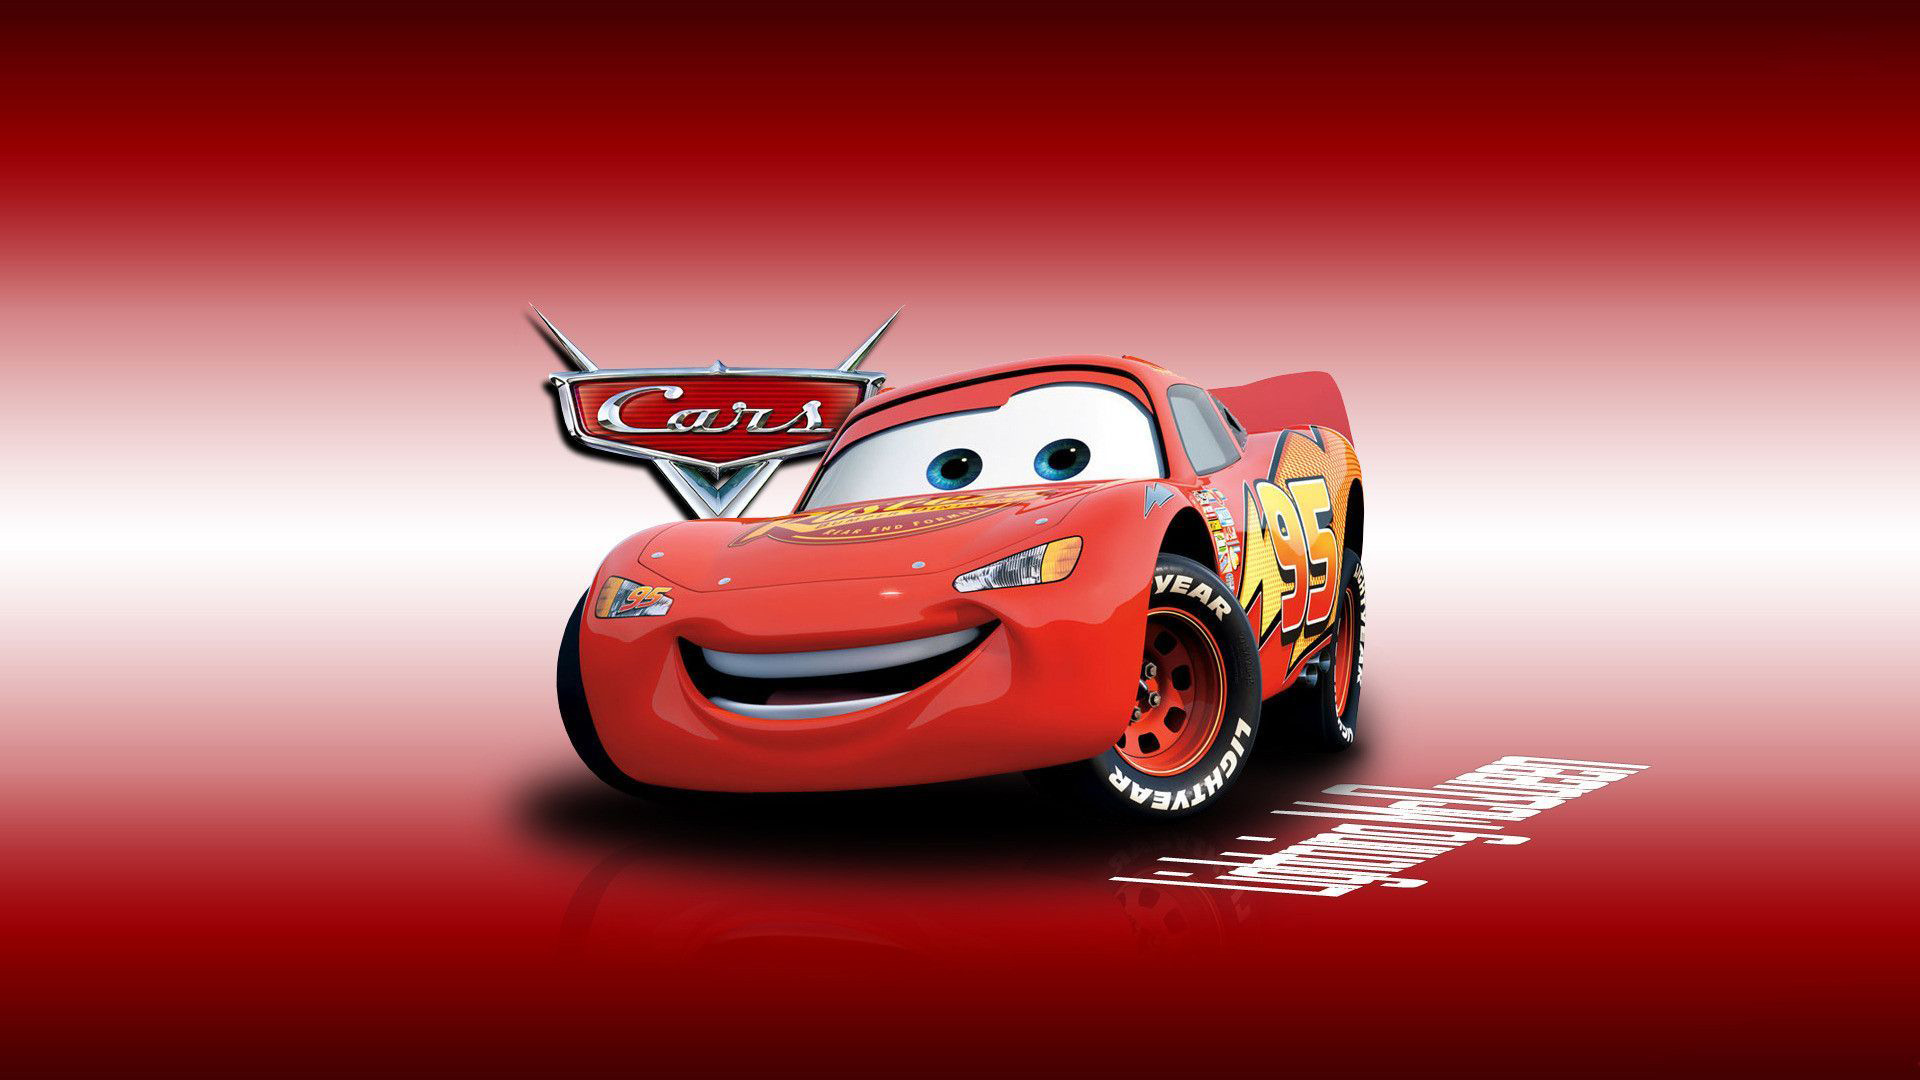 Disney Cars Backgrounds Free Download 